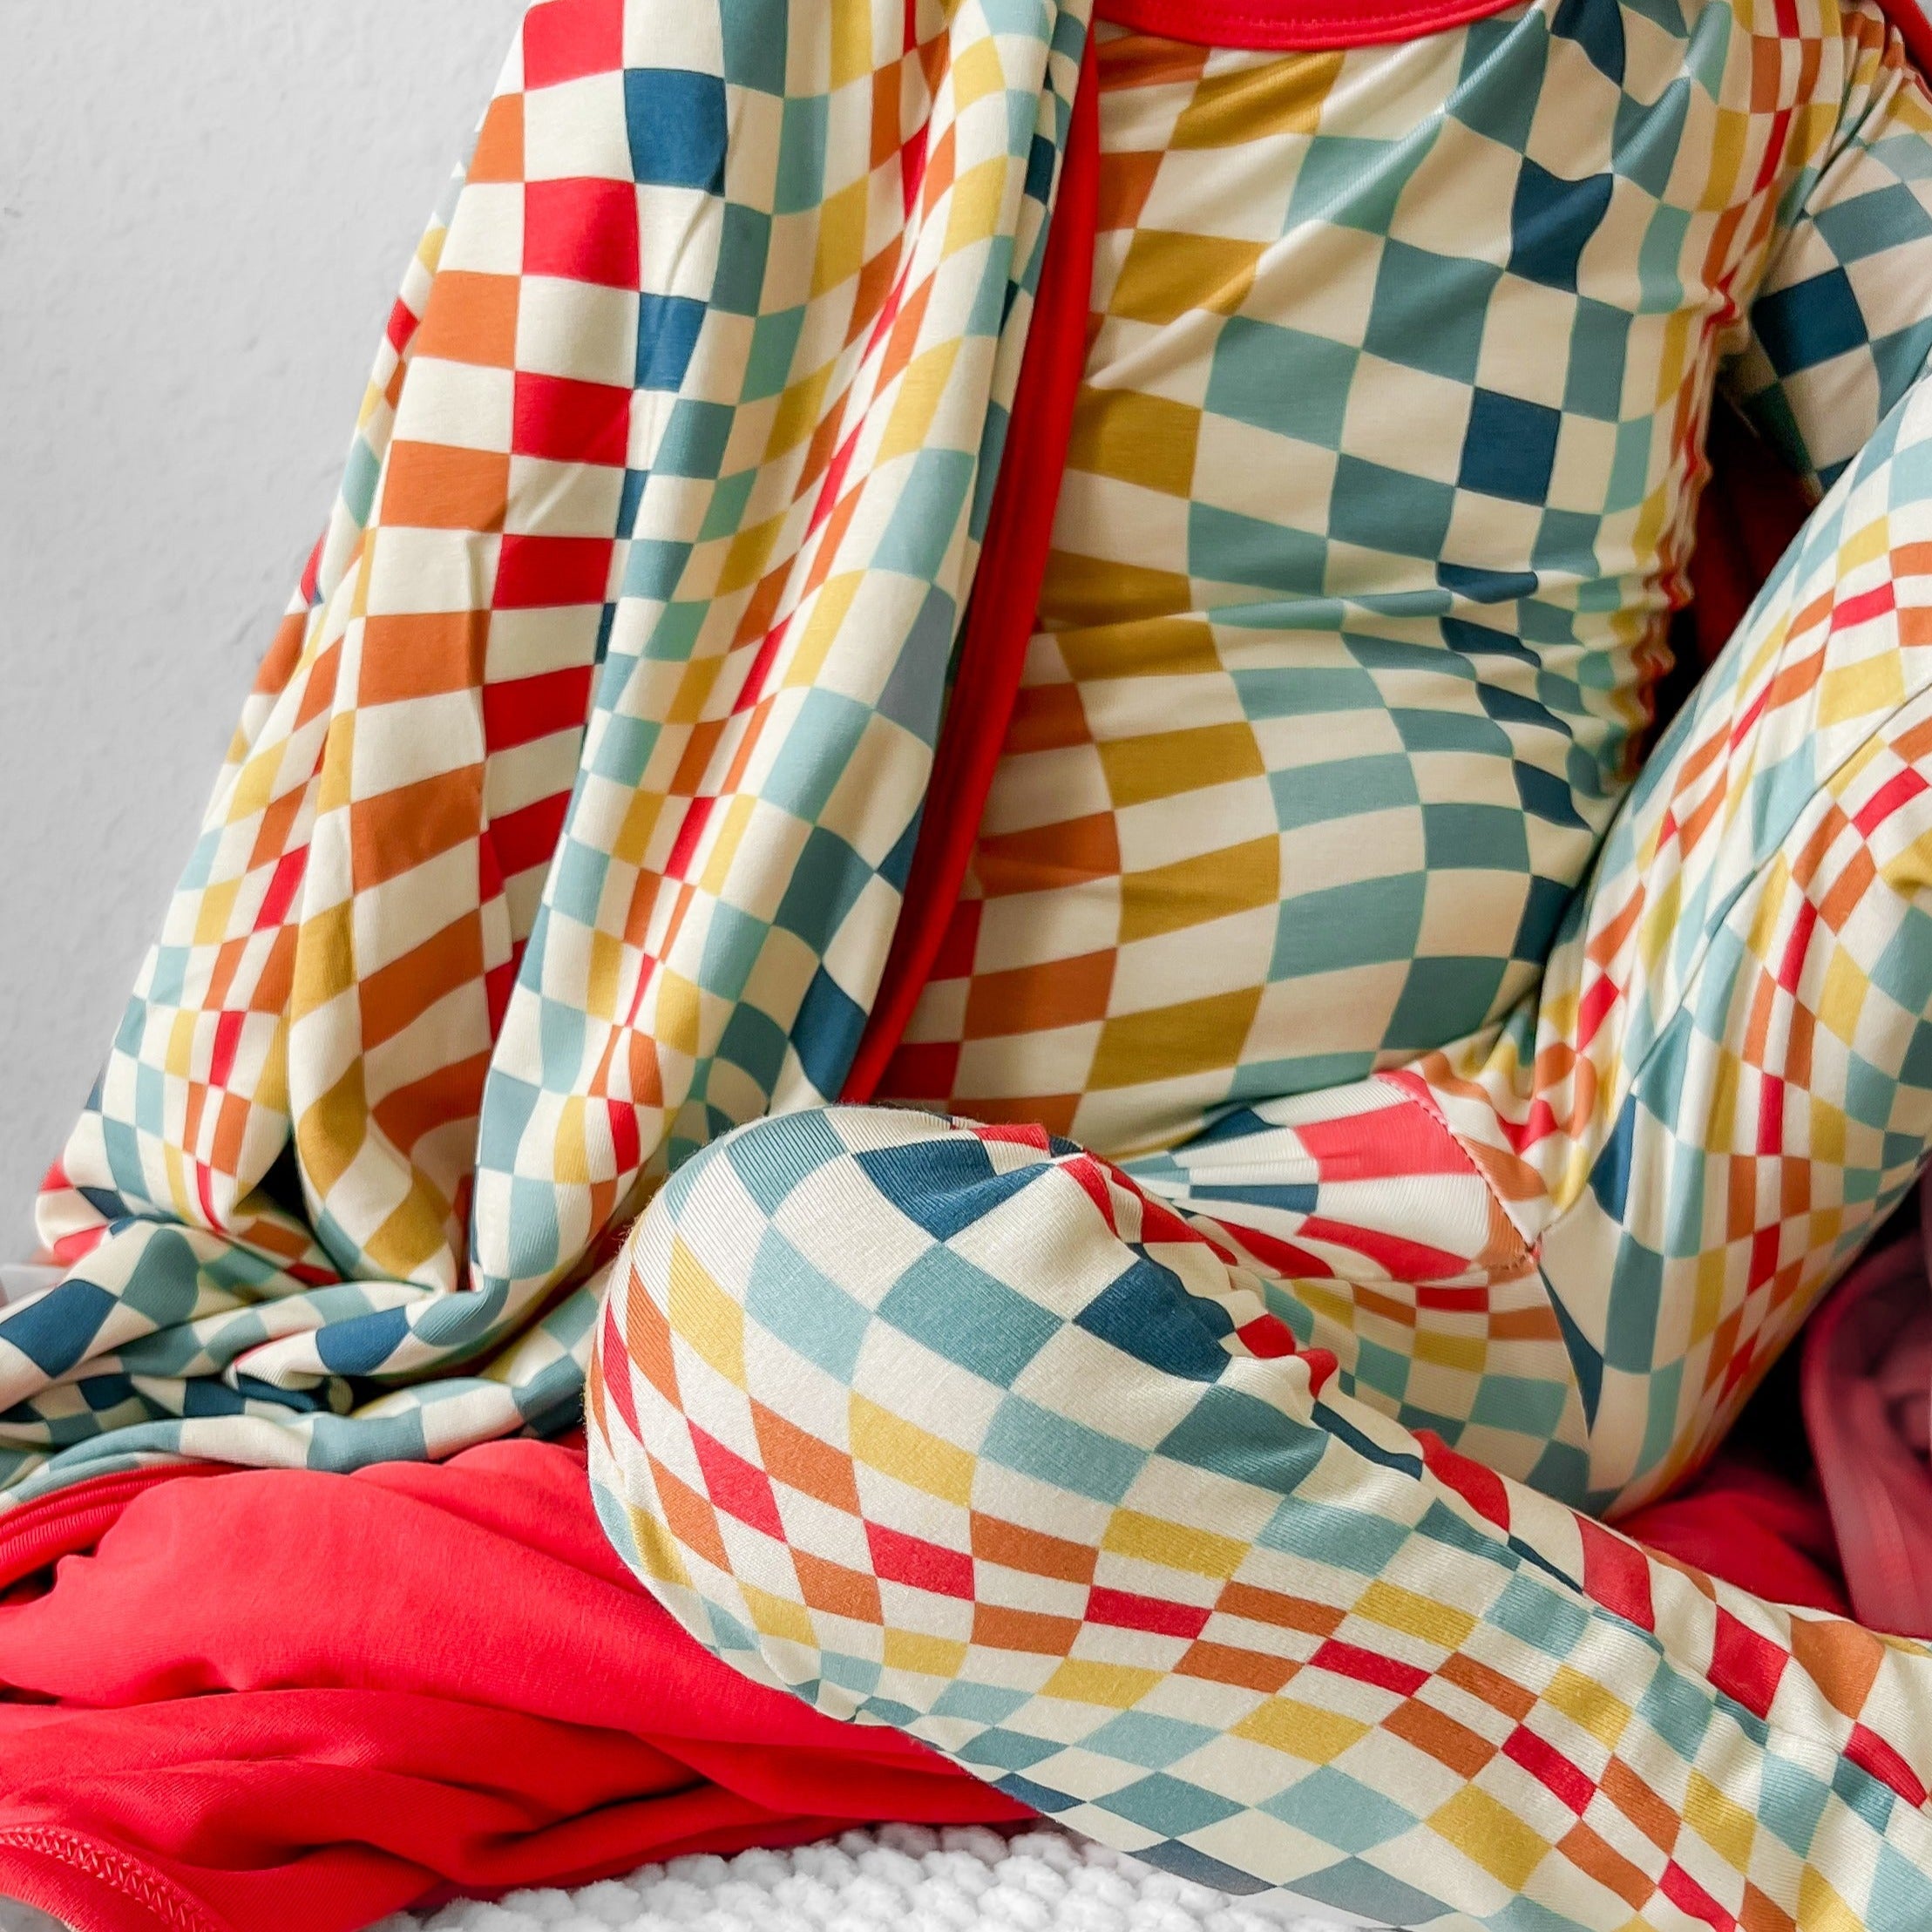 3 Layer Oversized Cozy Dream Blanket, Groovy Check